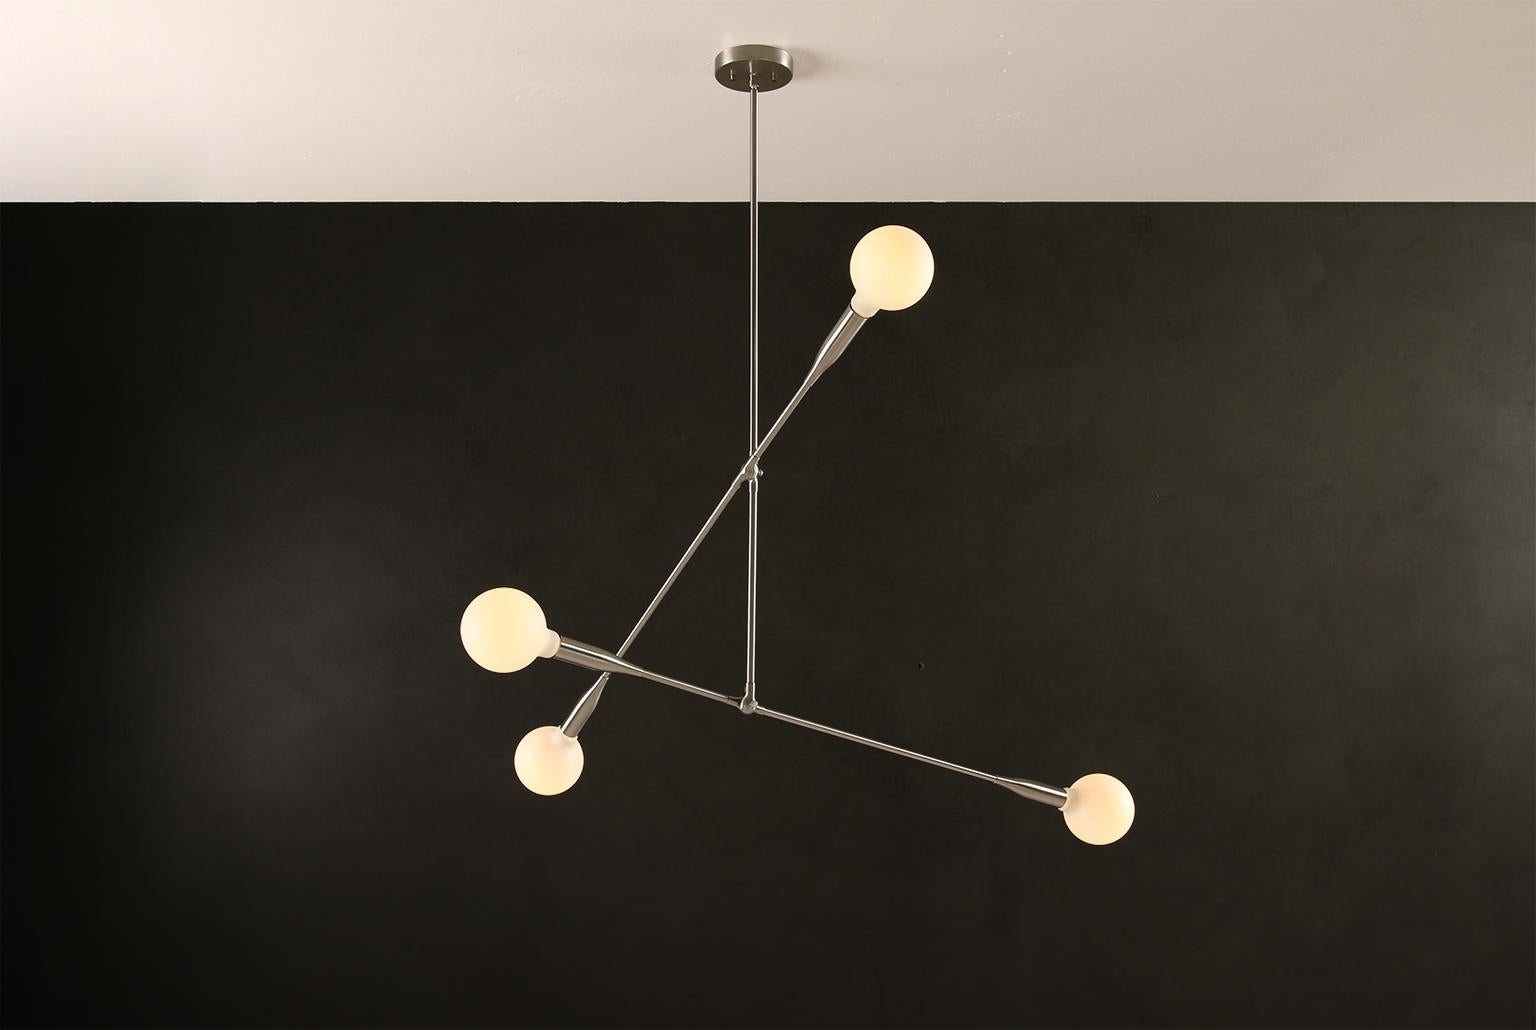 The Sorenthia 2-arm light is a modern, linear pendant with bold, elegant lines and dramatic negative space. The custom-made light fixture incorporates an element of the organic in its design language with long, reaching arms that can be adjusted on